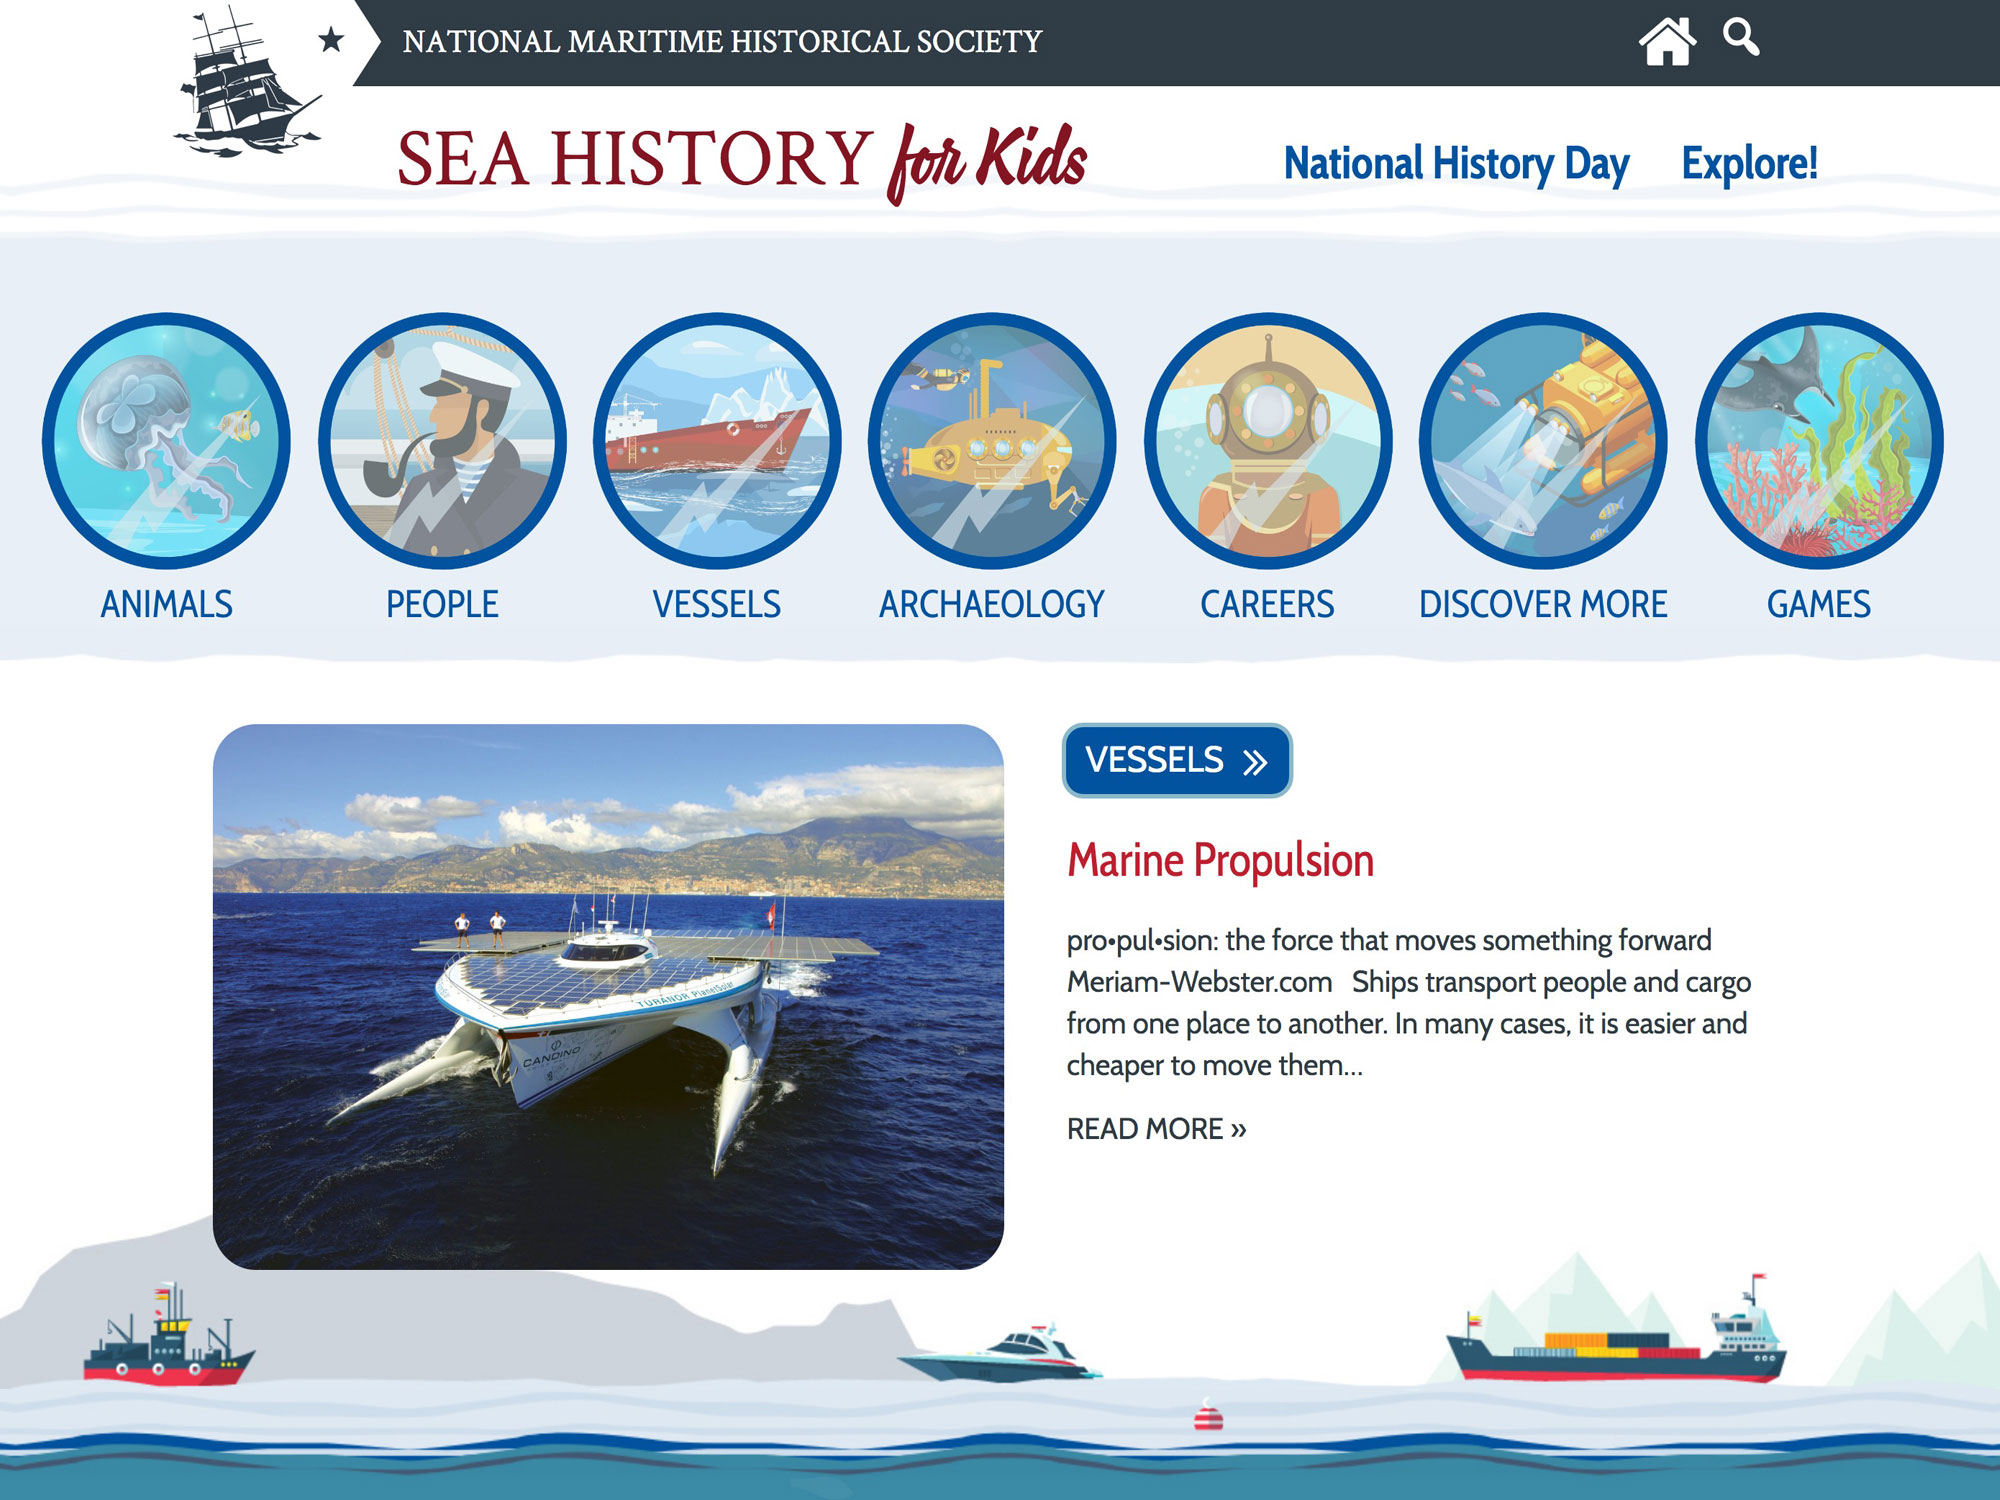 Sea History for Kids